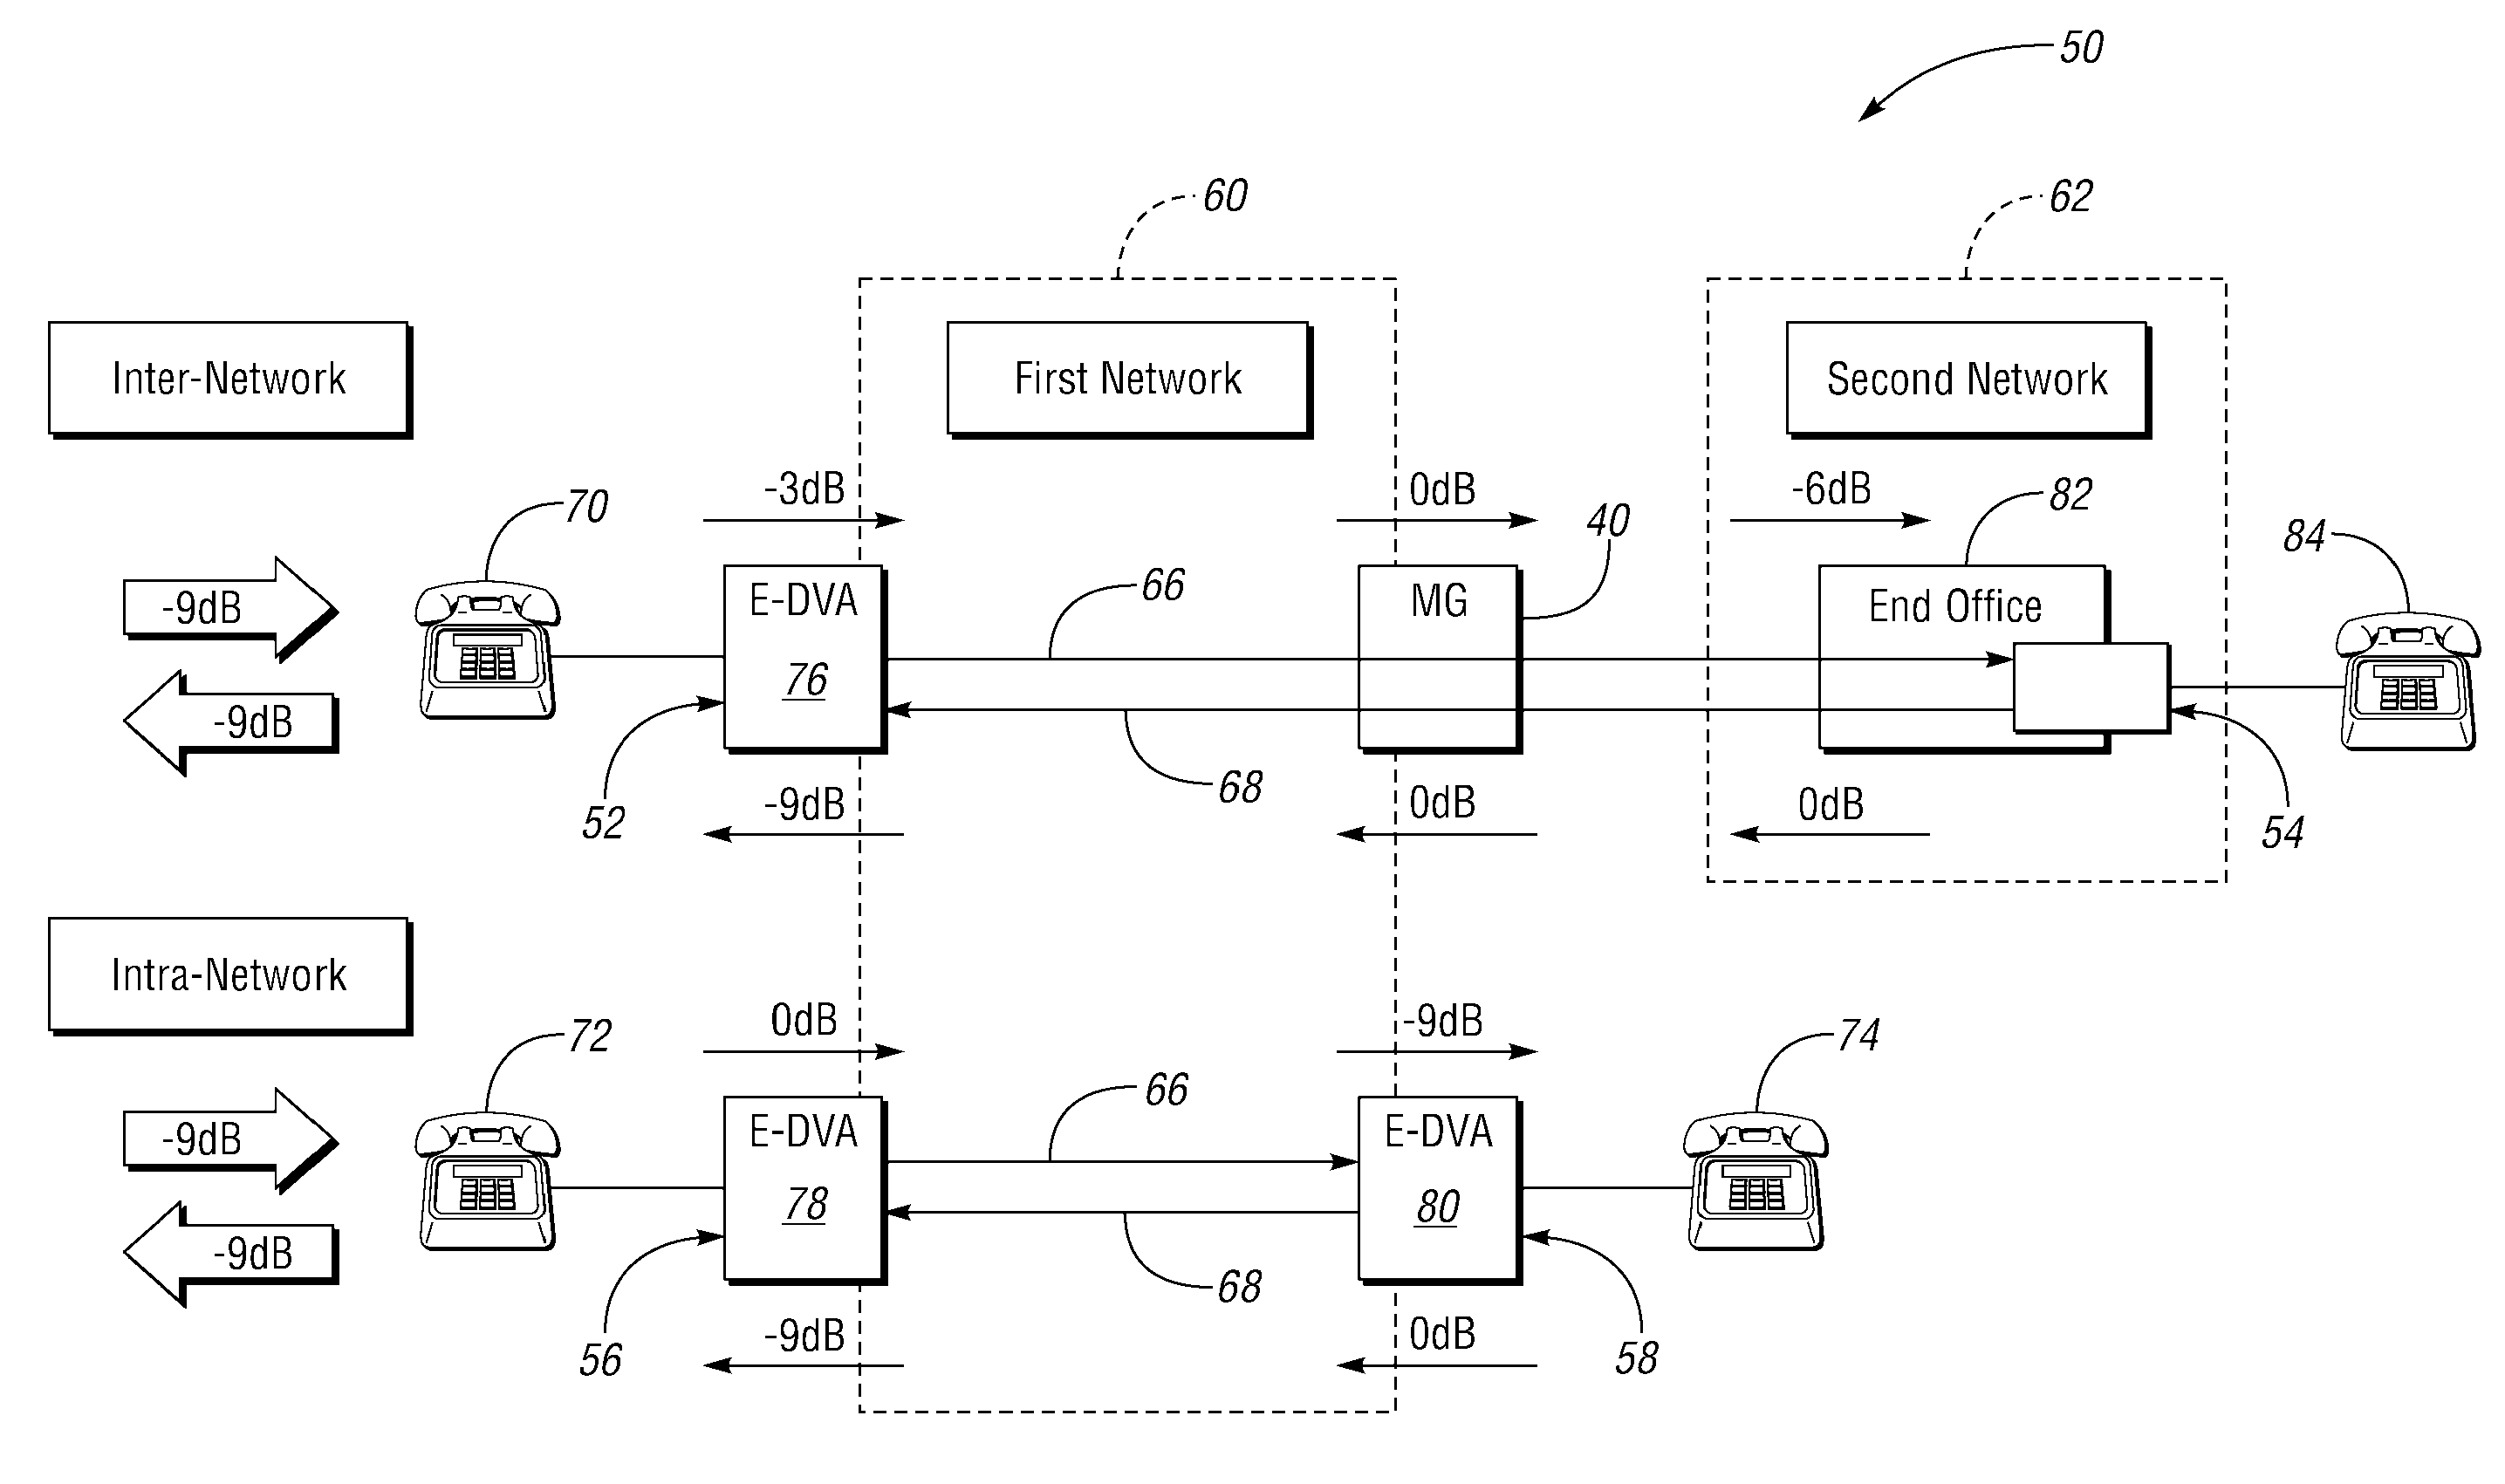 Dynamic management of end-to-end network loss during a phone call